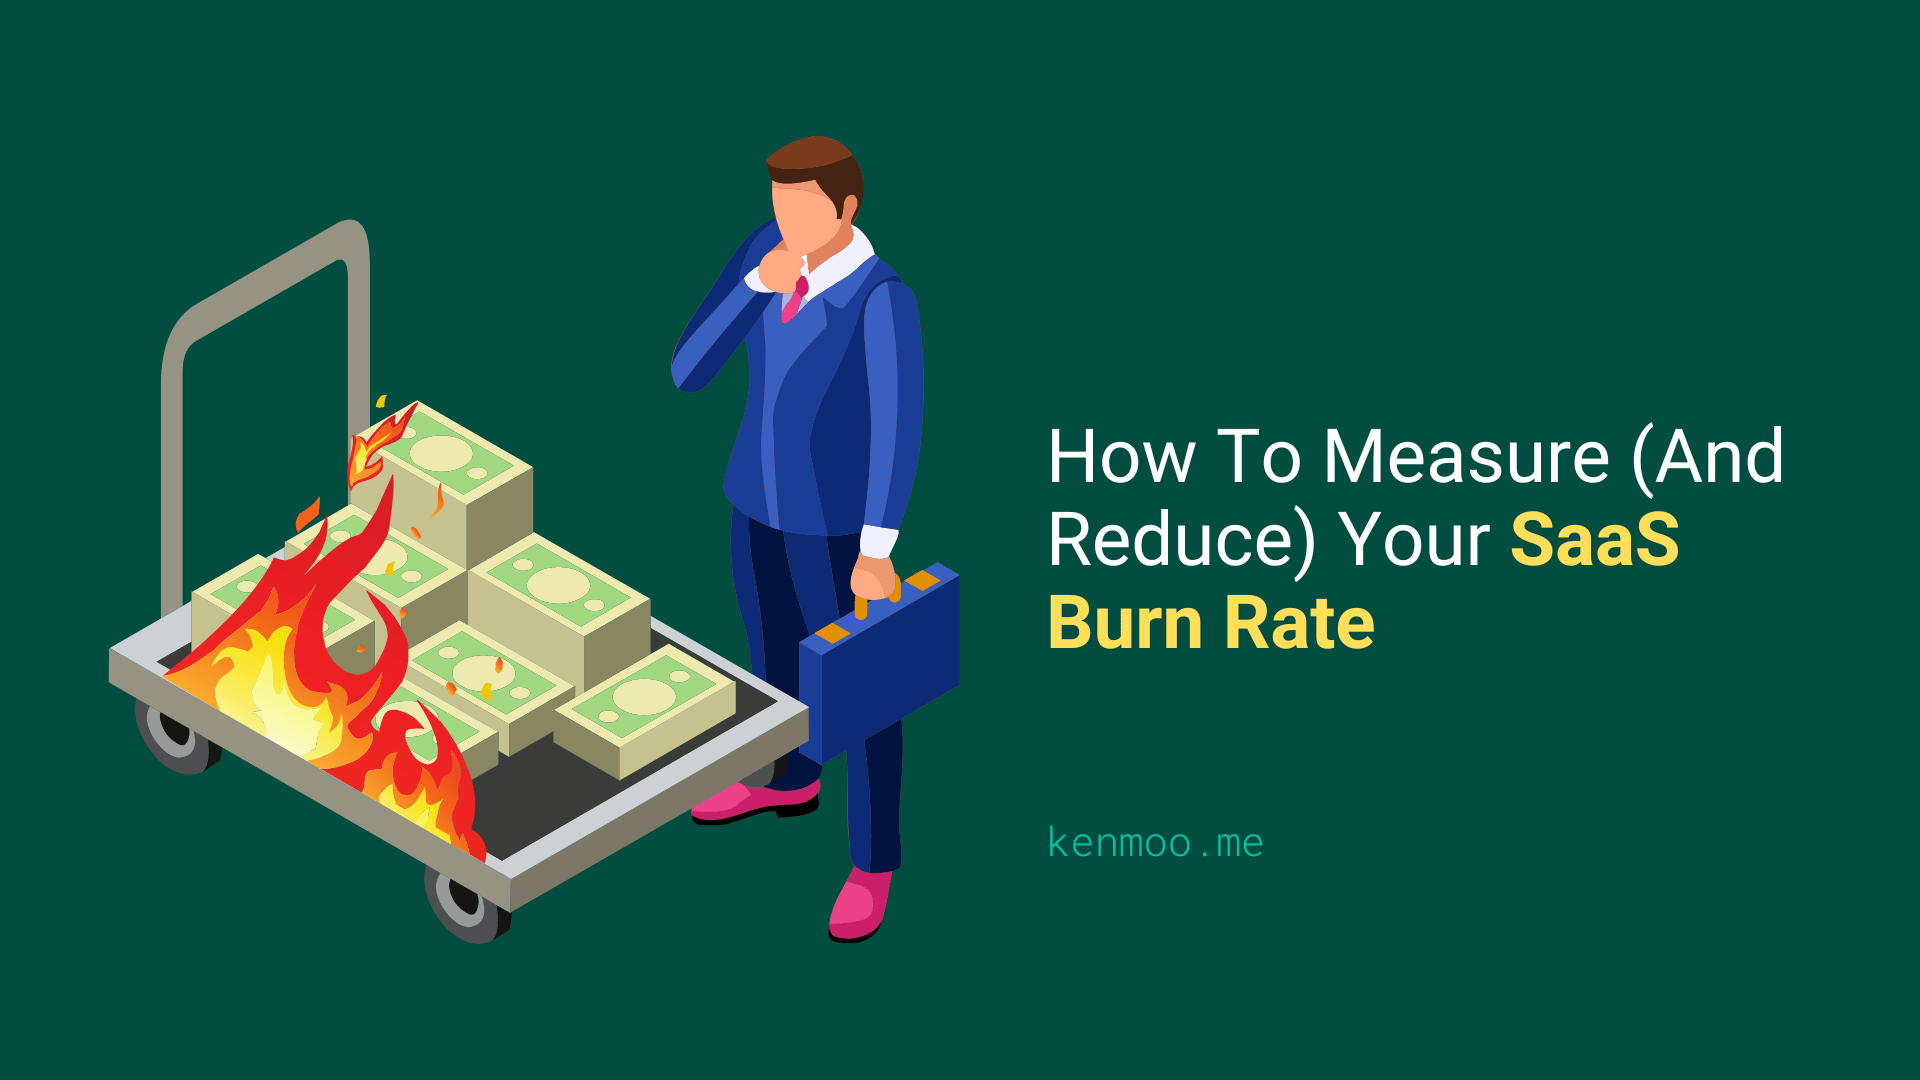 How To Measure (And Reduce) Your SaaS Burn Rate